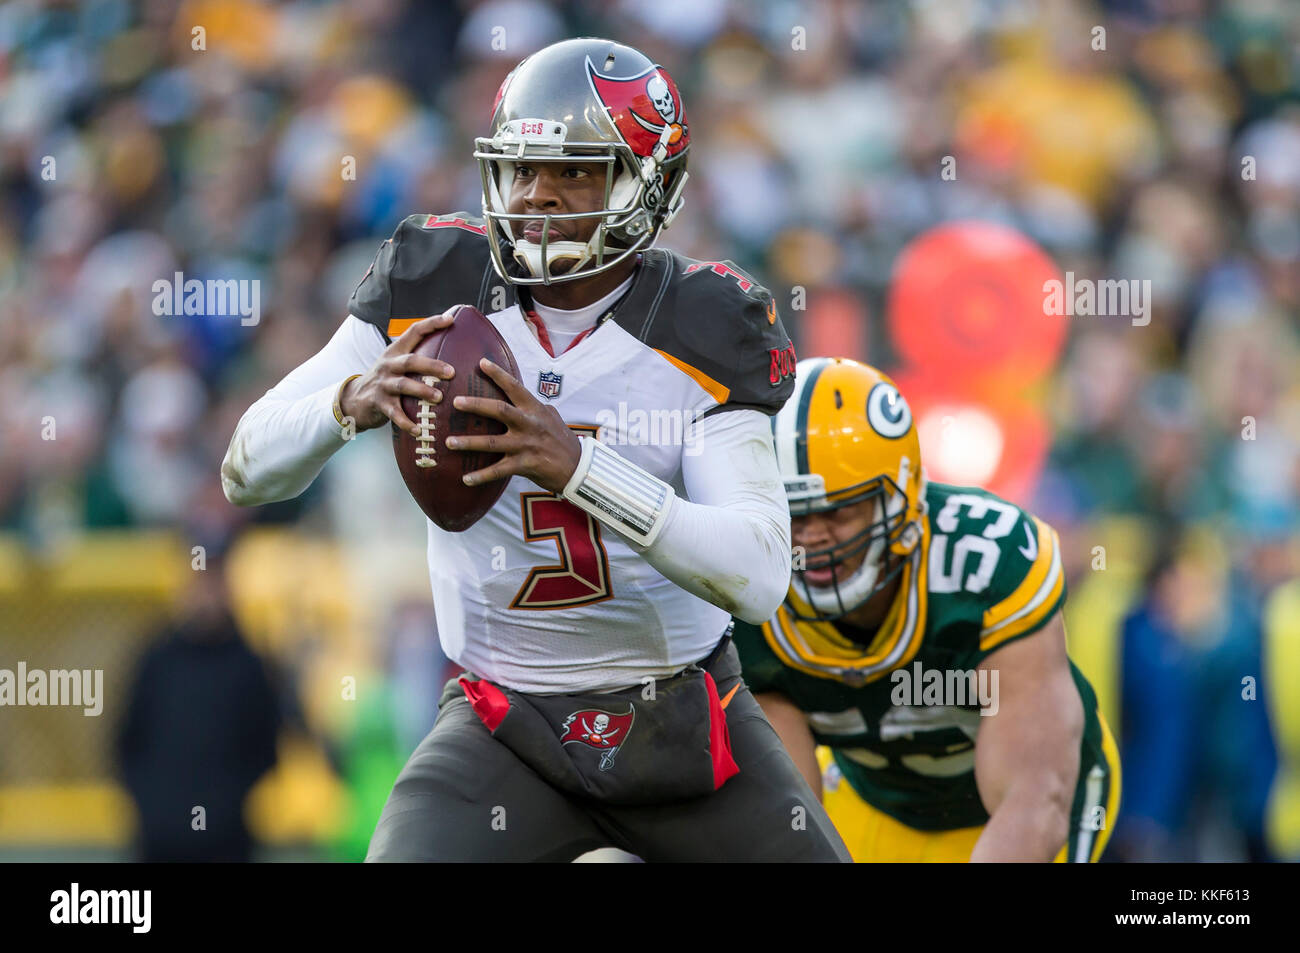 December 3, 2017: Tampa Bay Buccaneers quarterback Jameis Winston #3 scrambles during the NFL Football game between the Tampa Bay Buccaneers and the Green Bay Packers at Lambeau Field in Green Bay, WI. Packers defeated the Buccaneers in overtime 26-20. John Fisher/CSM Stock Photo